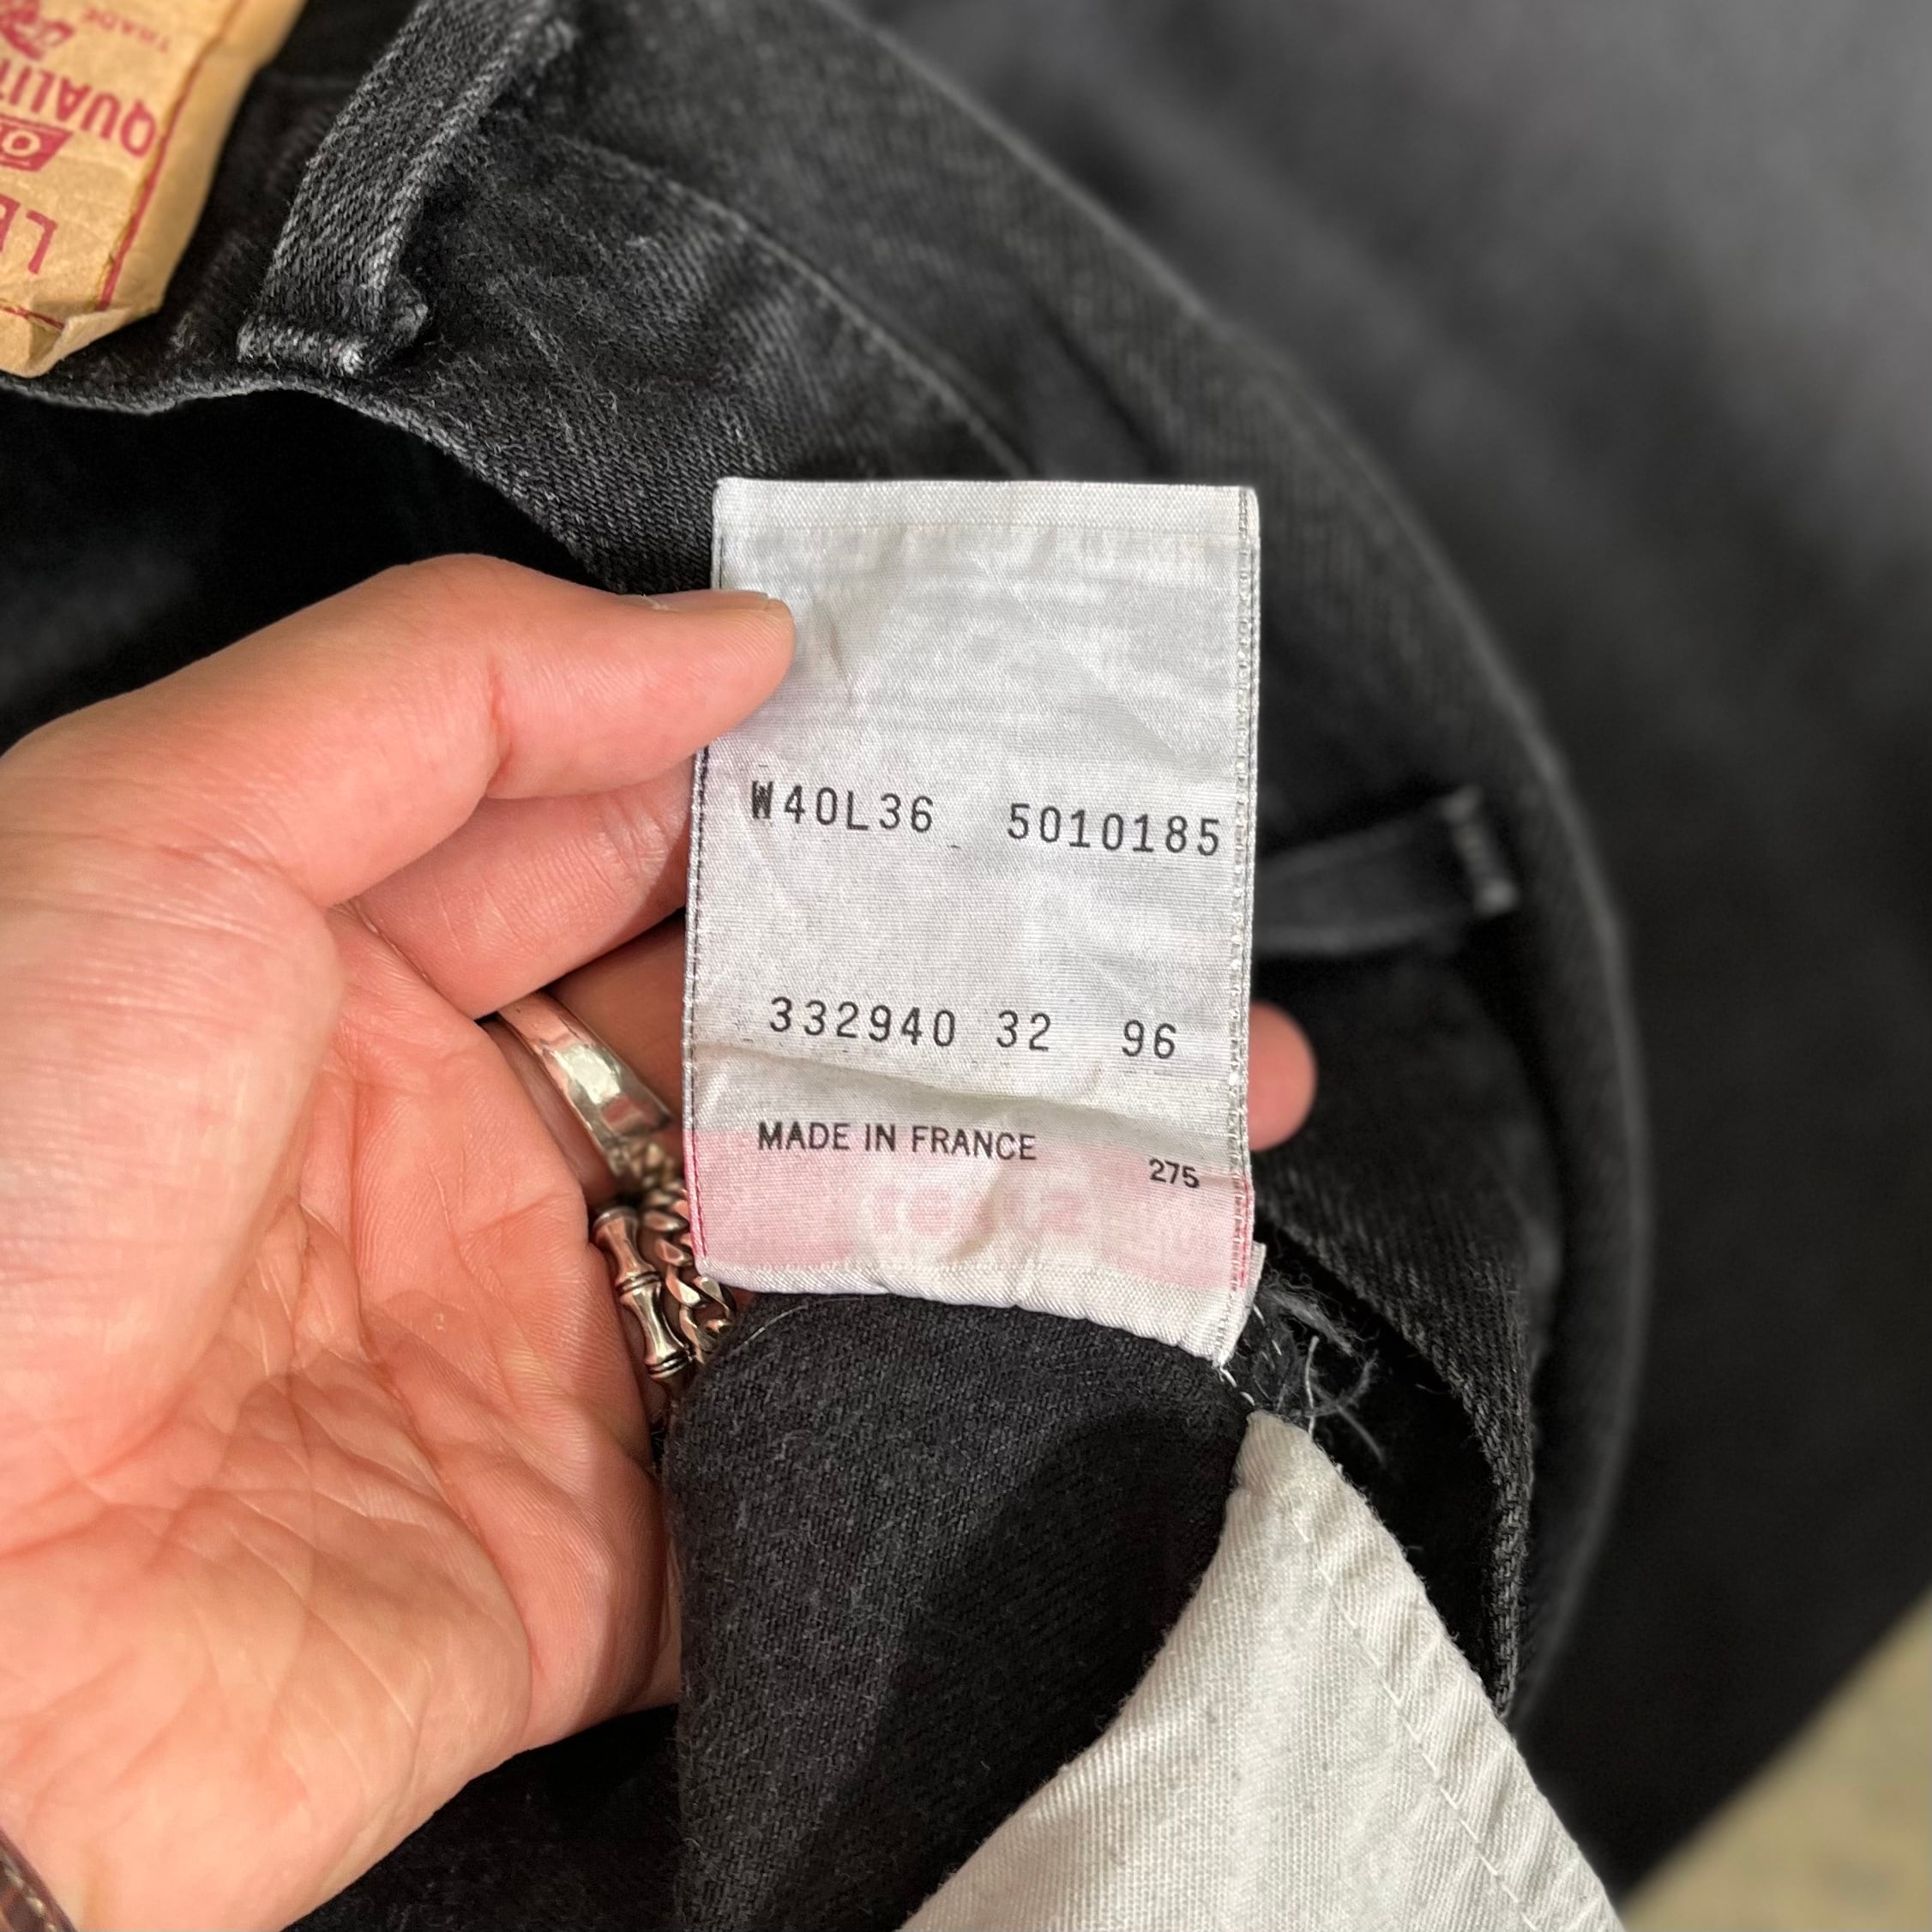 90s euro levi's 501 made in france